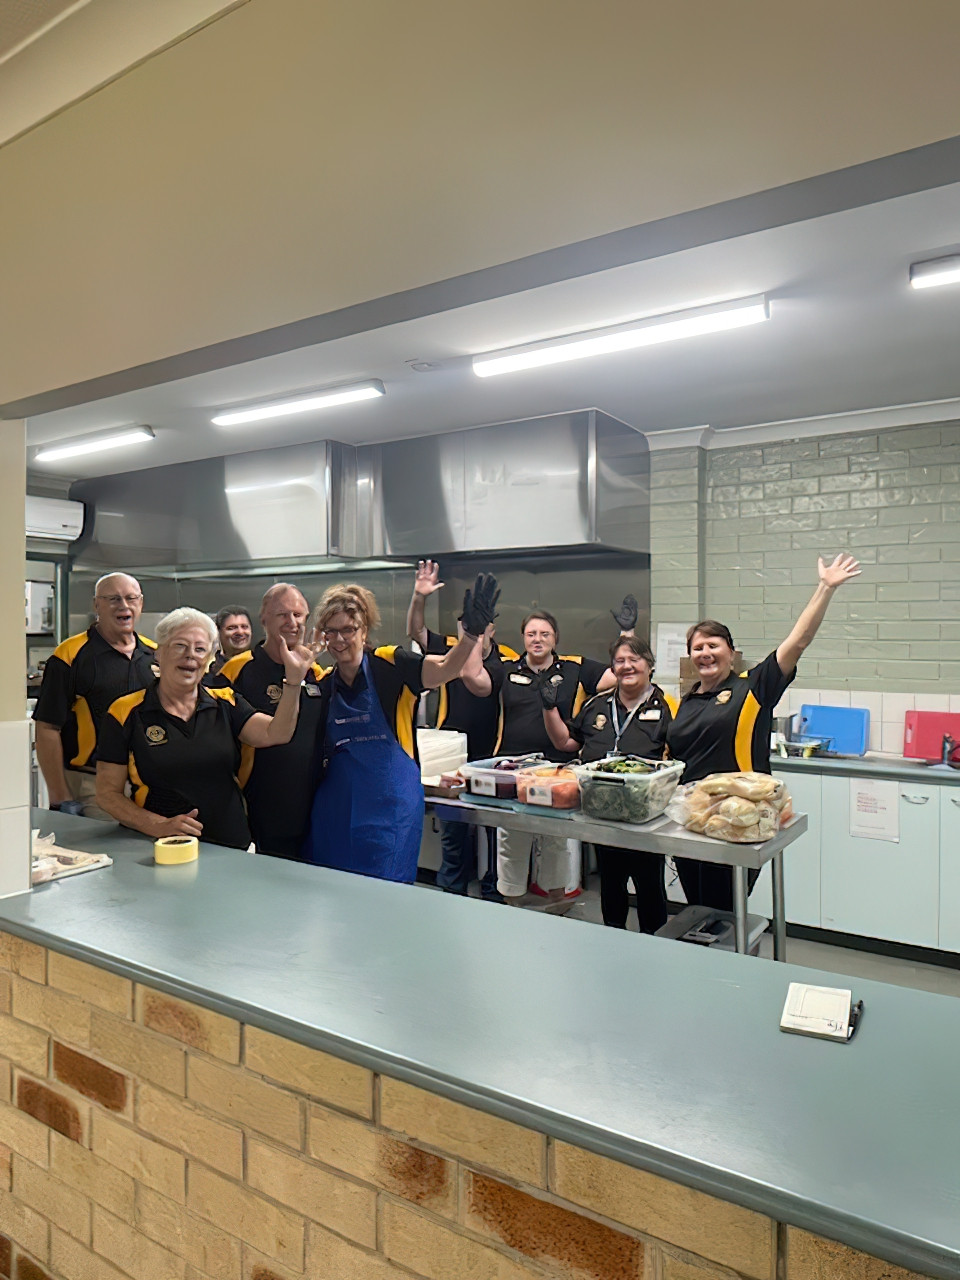 The Wamuran Lions were kept busy in the kitchen, during the recent BBQ event at the Wamuran Sports Complex Hall.